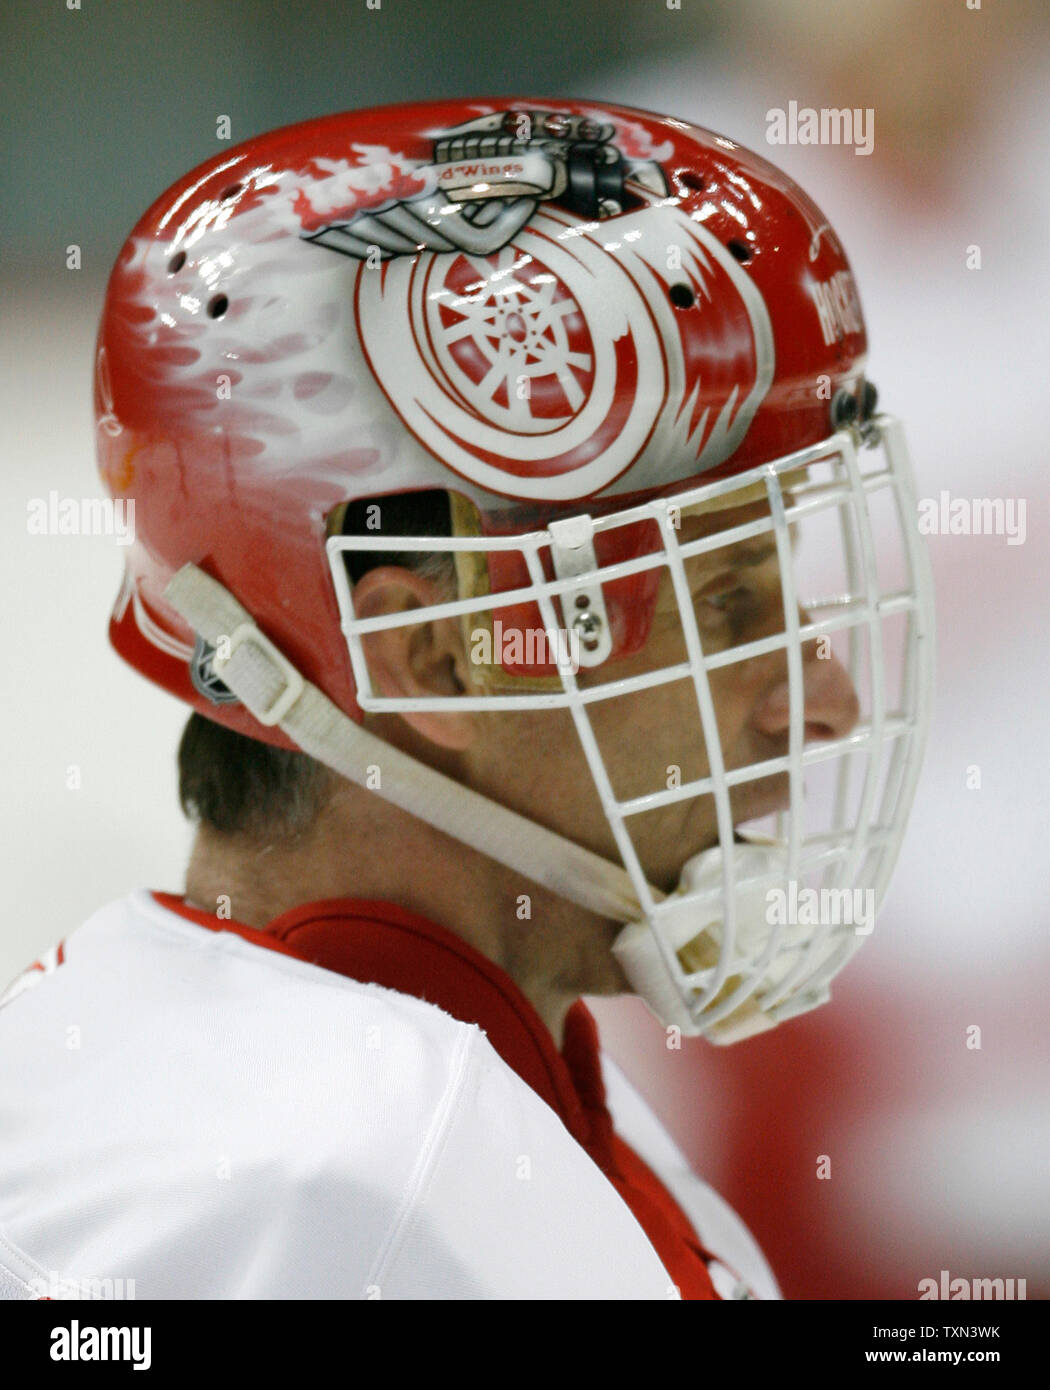 Dominik Hasek High Resolution Stock Photography And Images Alamy